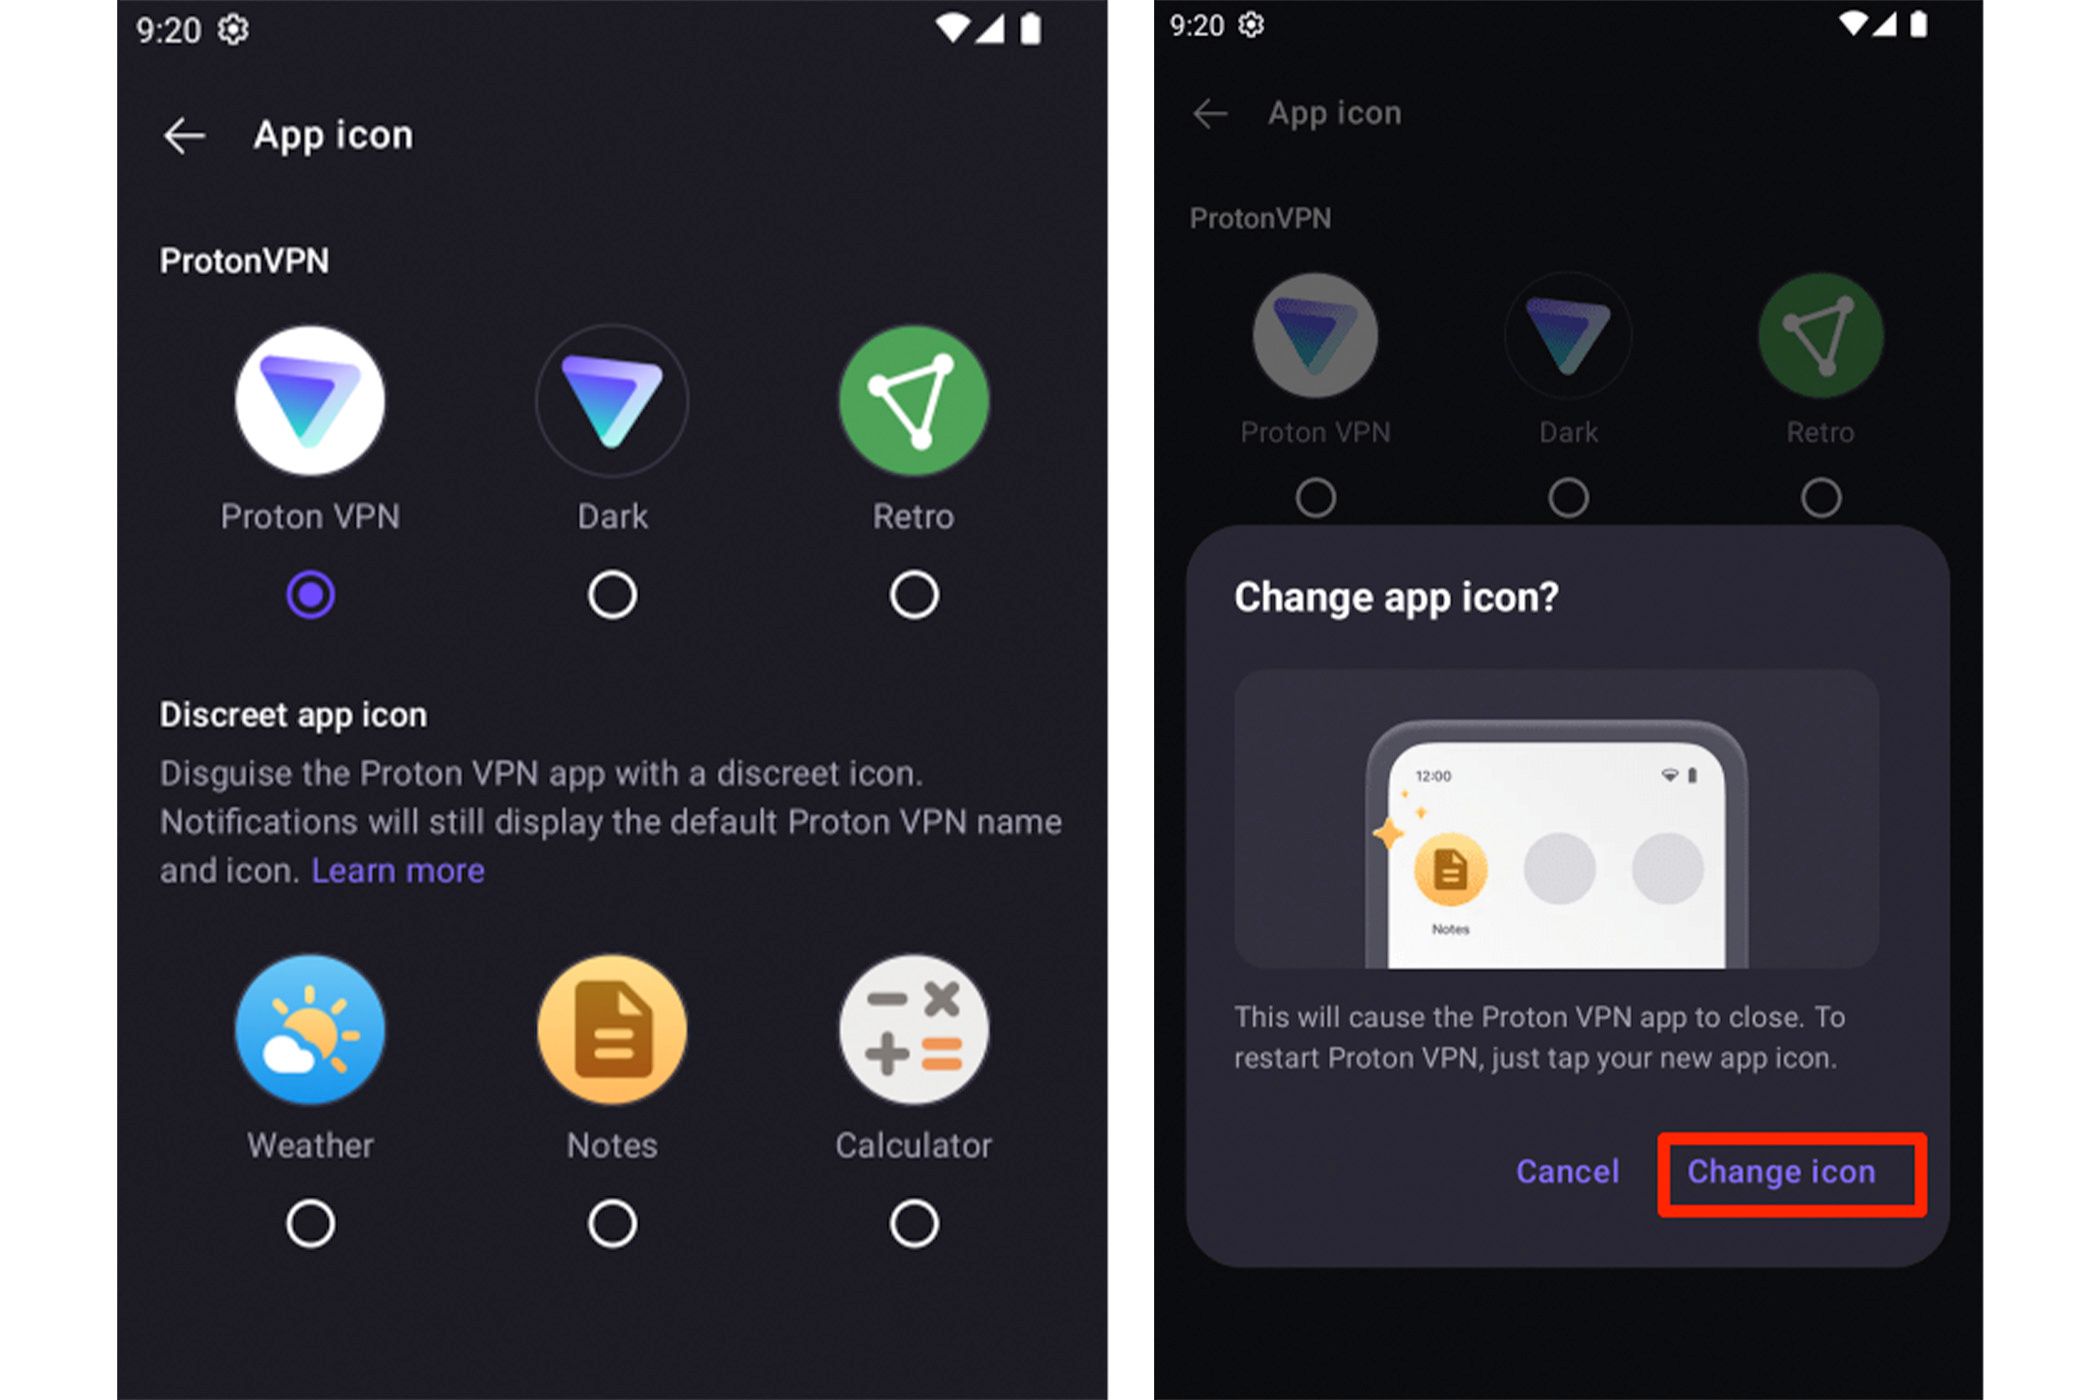 Disguising the Proton VPN app icon on an Android device.